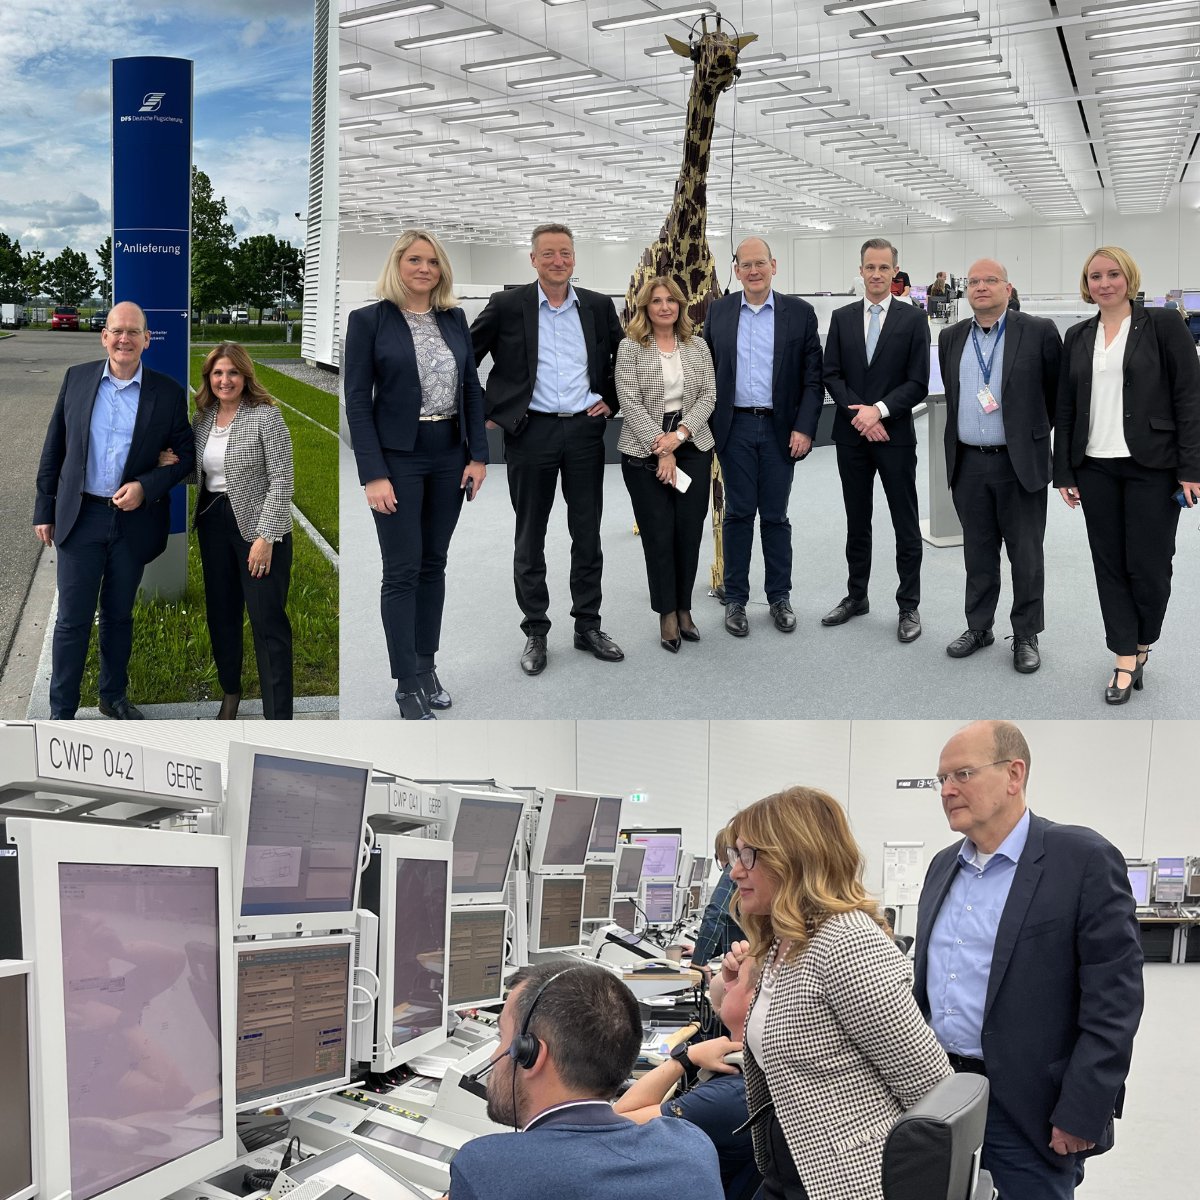 🛫 This week we visited our member @dfs_de & their new facilities in #Munich. It was great to see their contribution and engagement live in delivering the #Digital #European #Sky through #SESAR deployment. 🤝 Many thanks to all involved & let's keep #modernising #ATM  #EU #AsOne